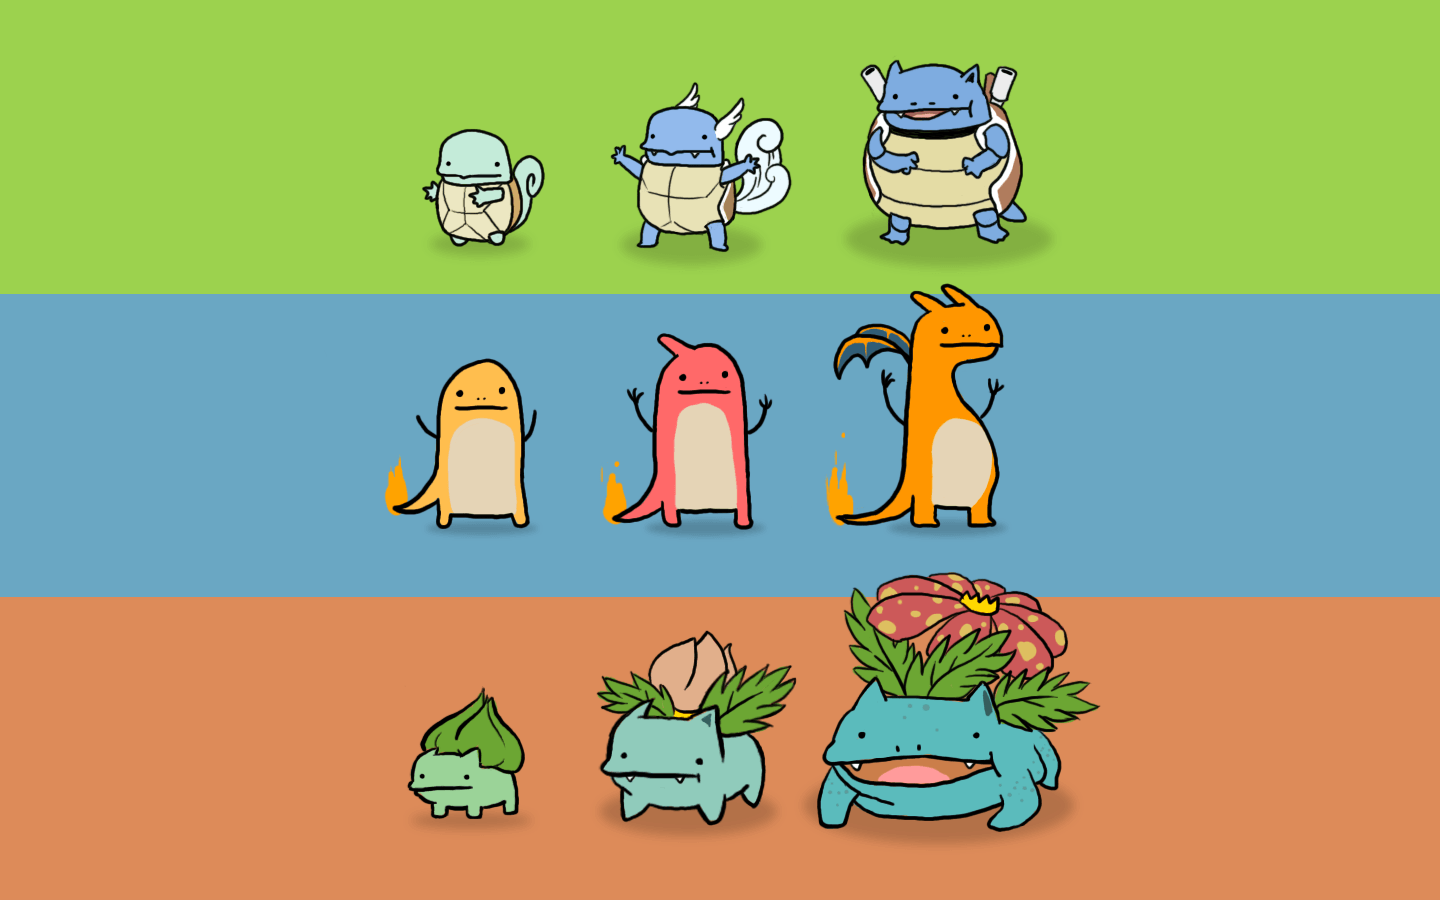 Easily The Best Drawing Of The Starters From Red And Blue. (x Post From /r/ Pokemon)